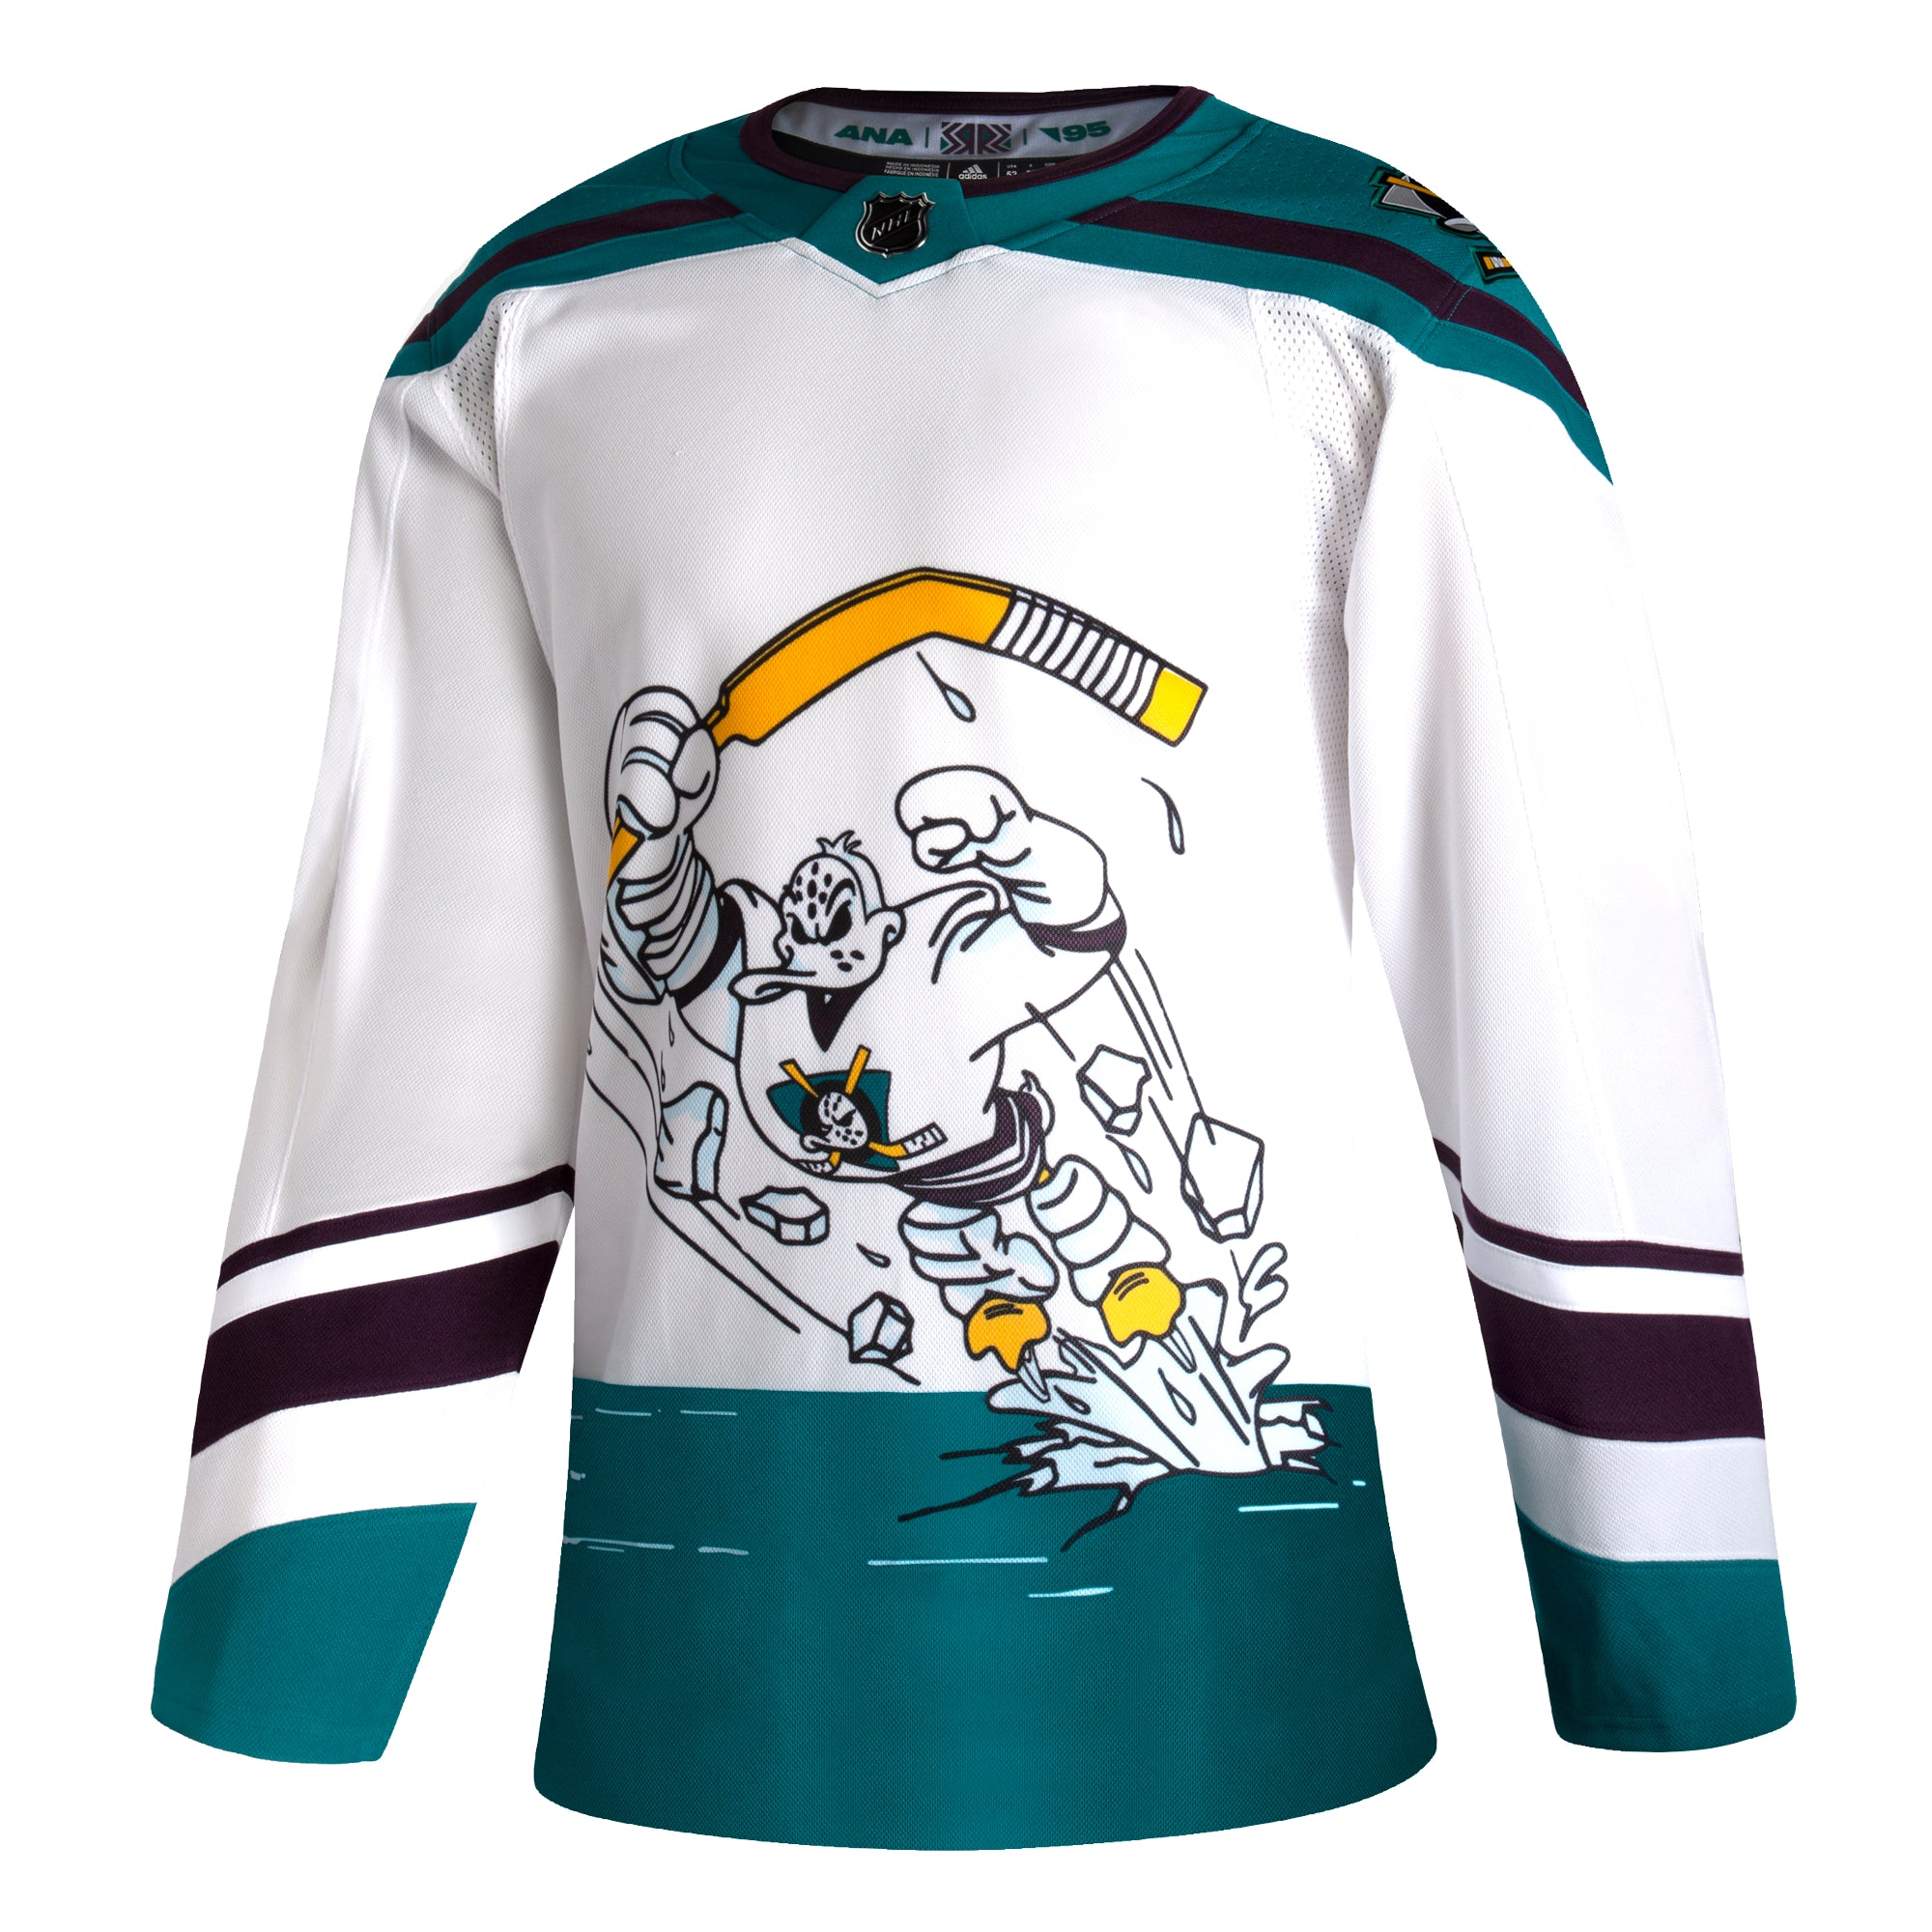 Breakout Night Apr 24, The Reverse Retro jerseys make their final  appearance of the season on Saturday!, By Anaheim Ducks